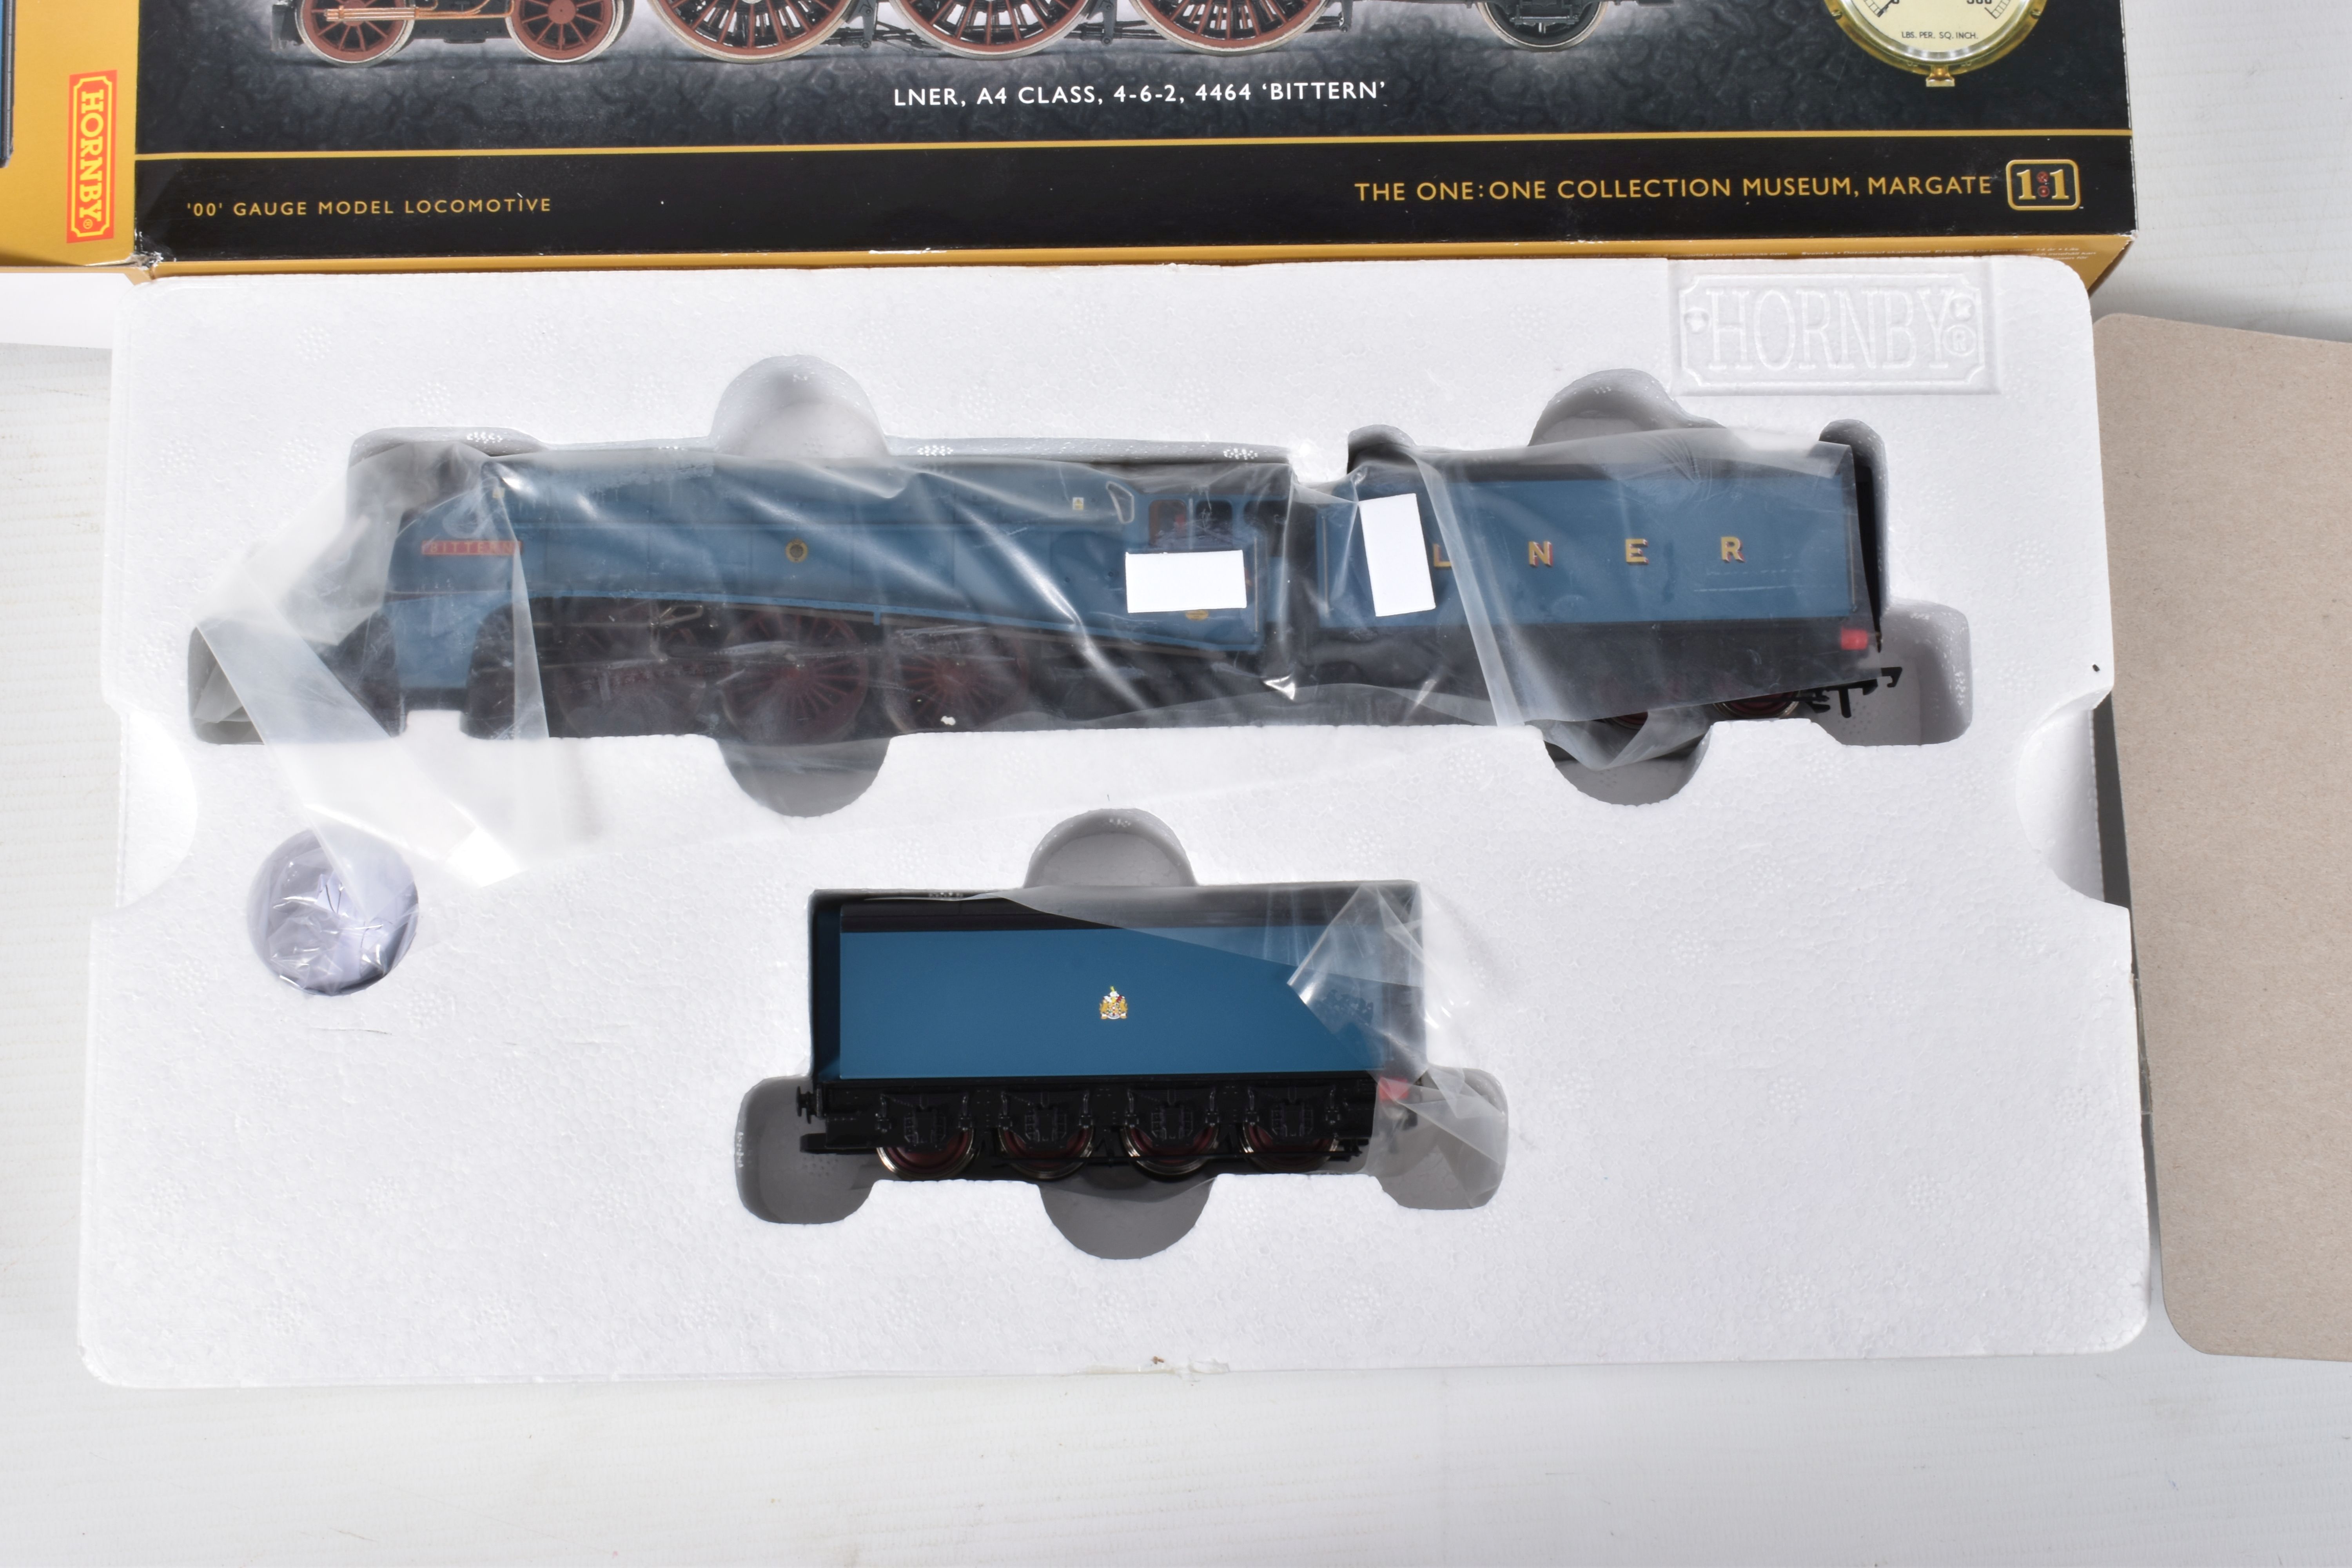 A BOXED HORNBY RAILWAYS OO GAUGE A4 CLASS LNER LOCOMOTIVE, numbered R3771, 4-6-2, 4462 'Bittern in - Image 6 of 6